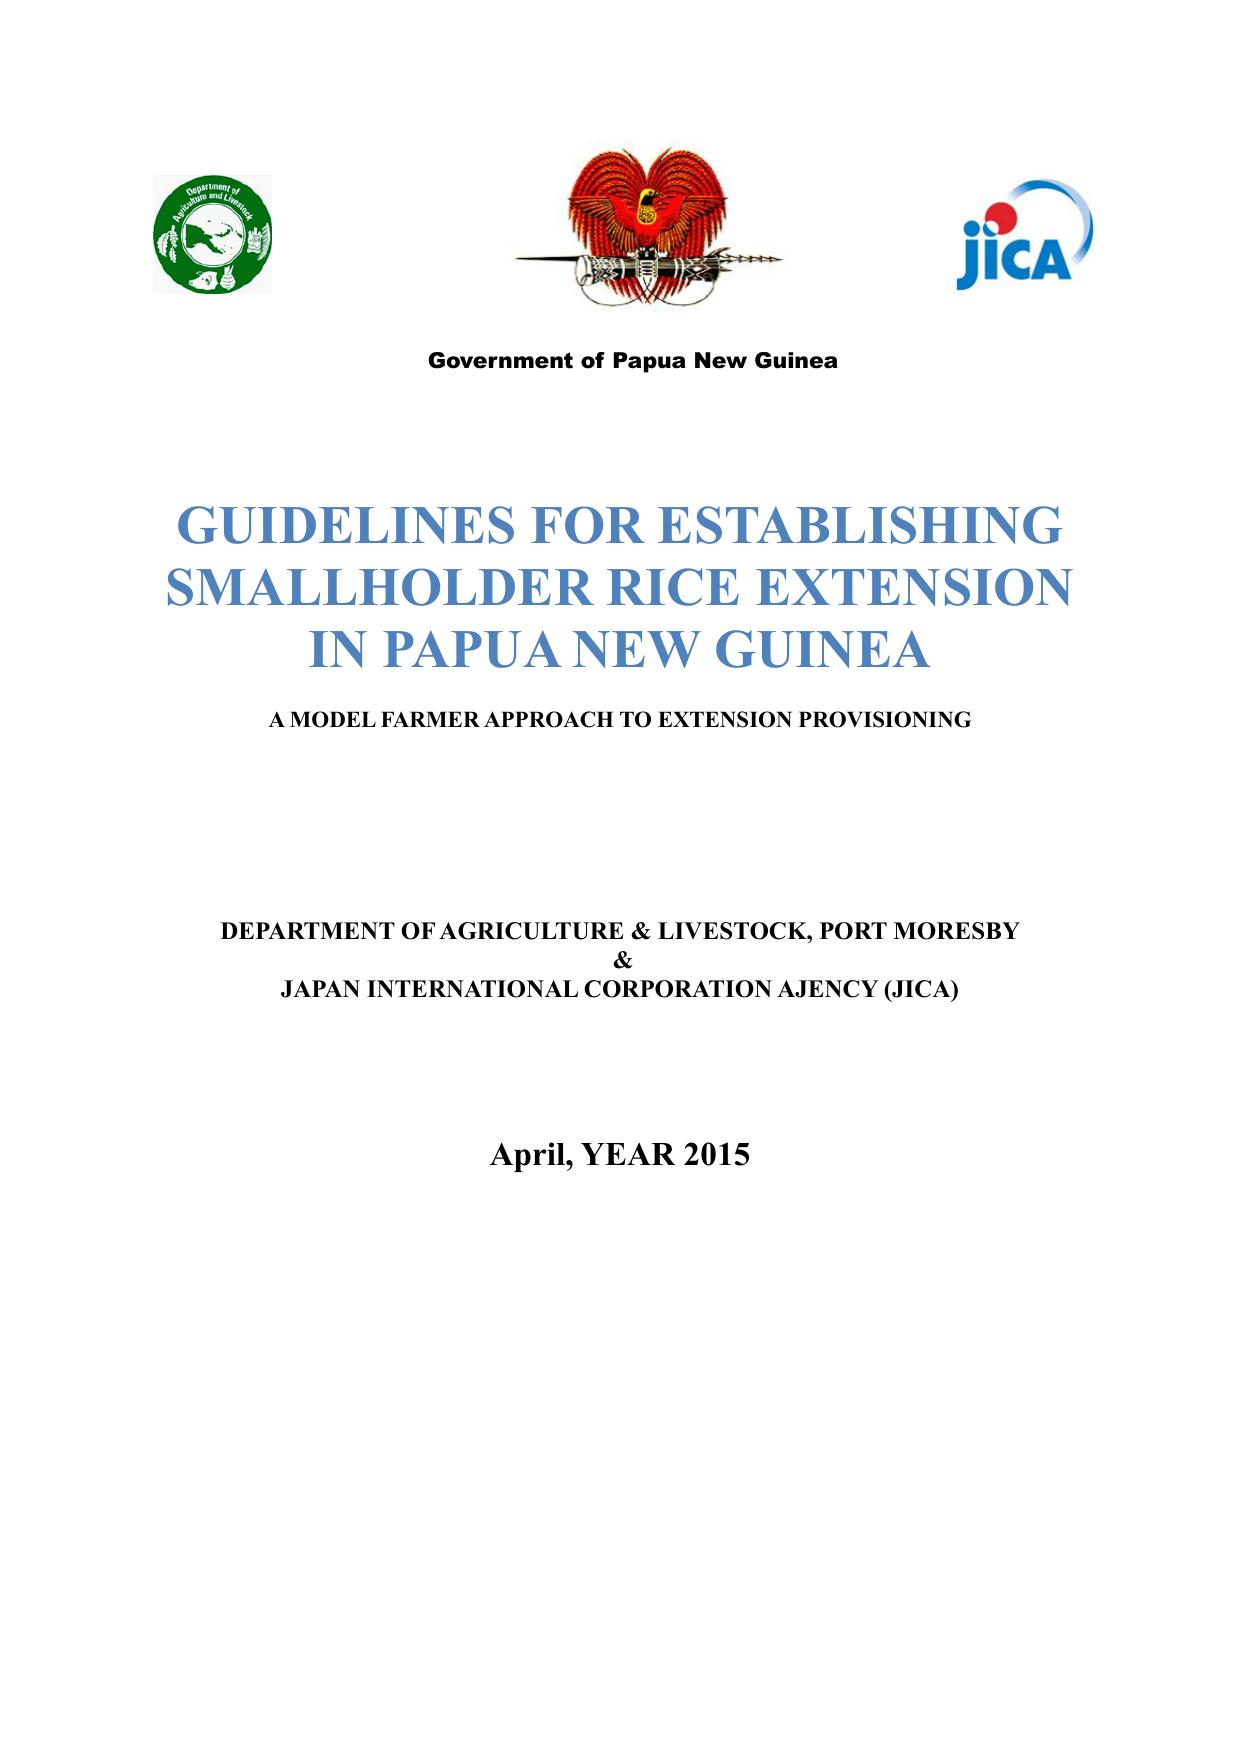 GUIDELINES FOR ESTABLISHING SMALLHOLDER RICE EXTENSION IN PAPUA NEW GUINEA 2015